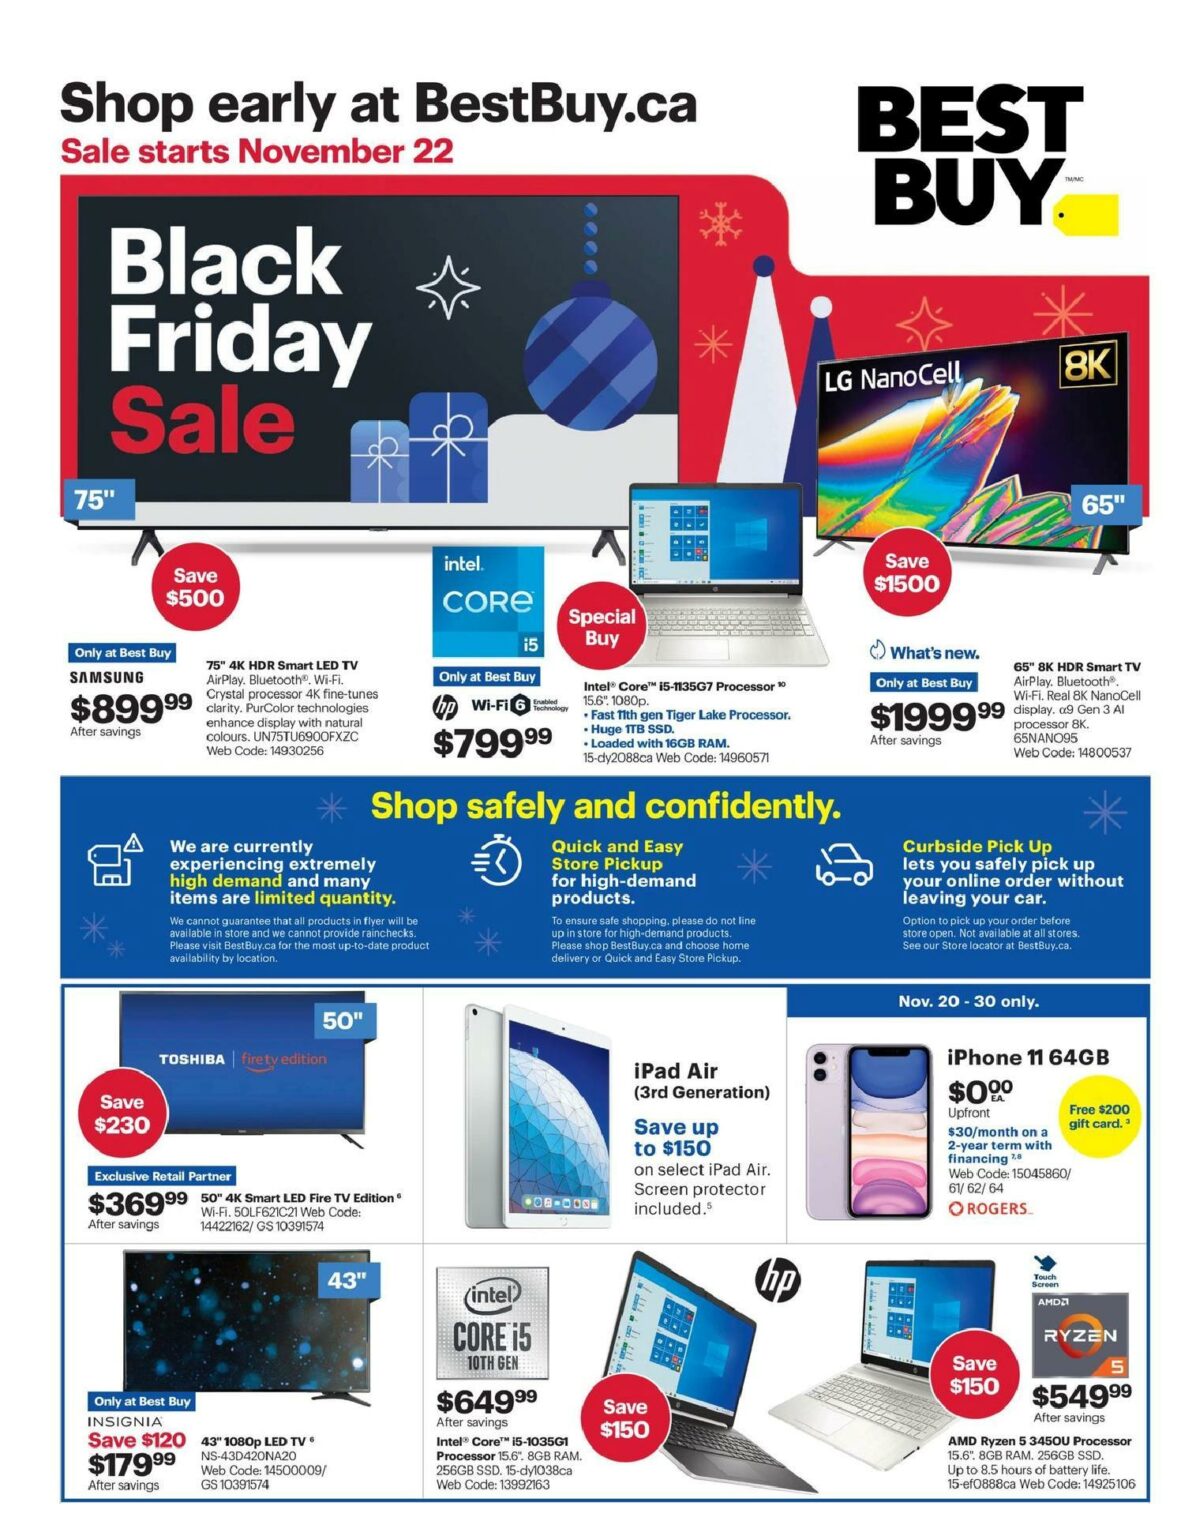 Best Buy Black Friday Flyer Deals 2020 Canada - What Are The Black Friday Deals Today